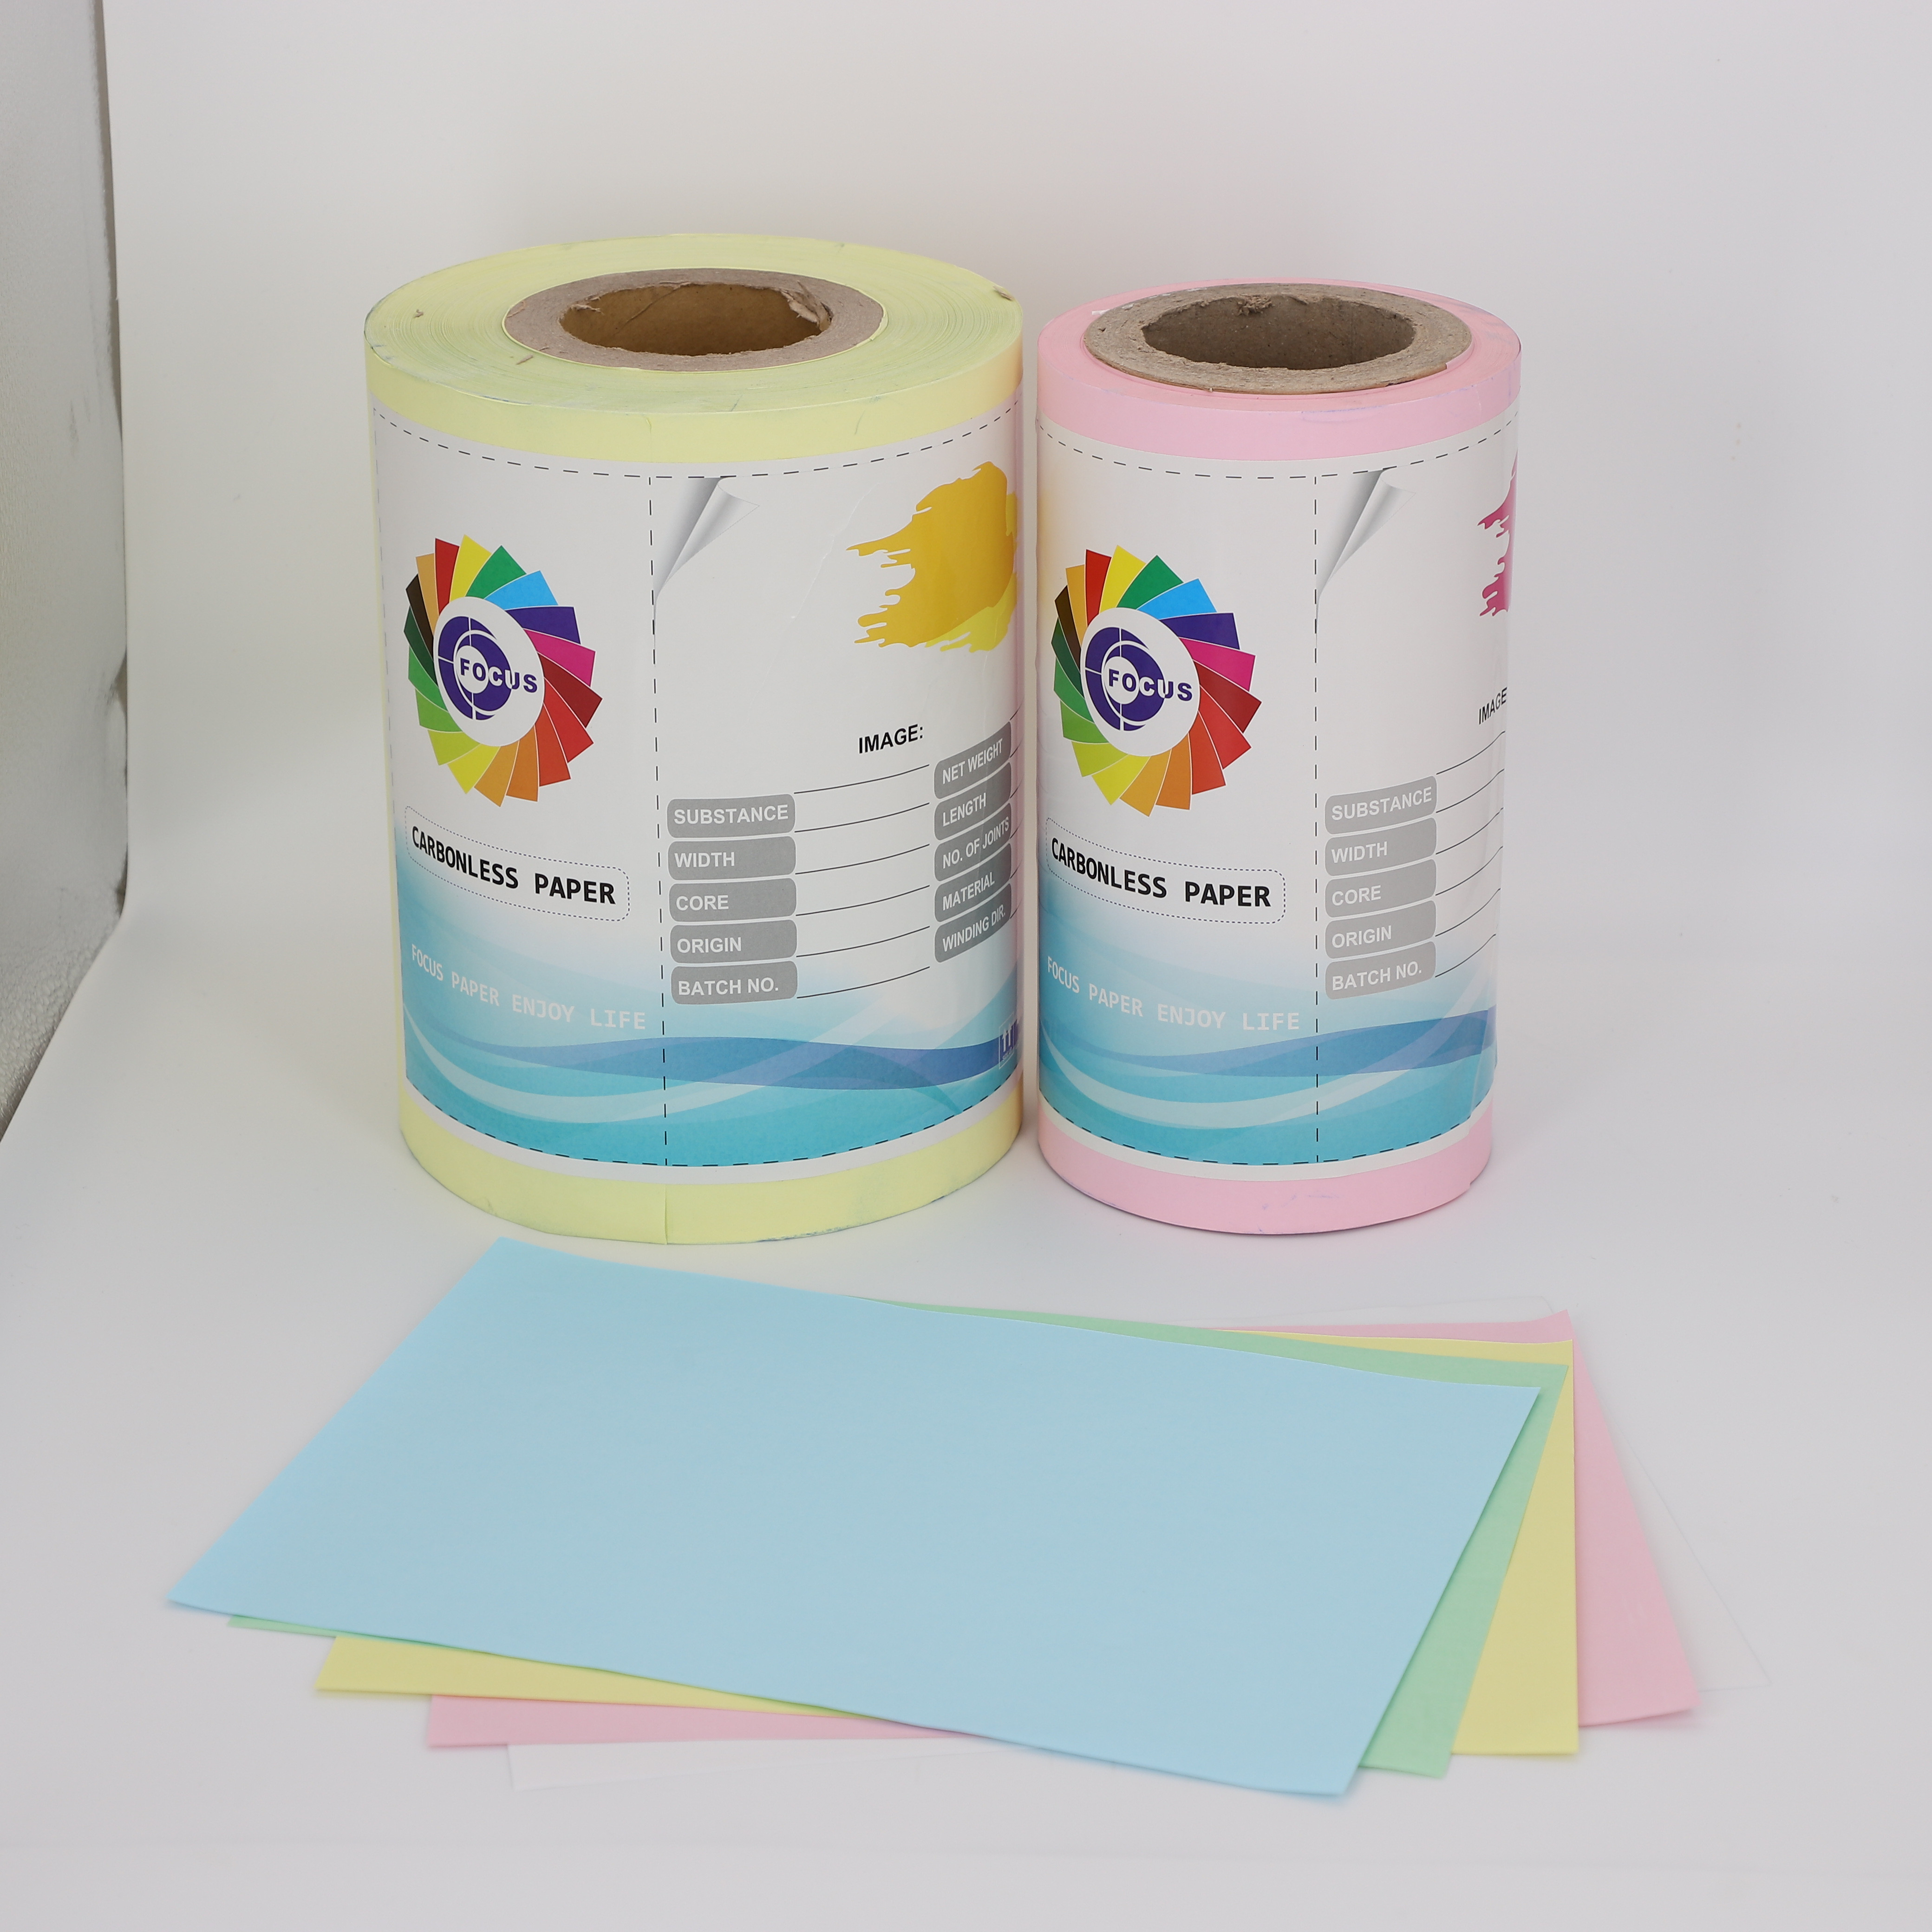 Customized NCR Paper in Different Colors for Invoice and Receipt Printing in Large Quantity